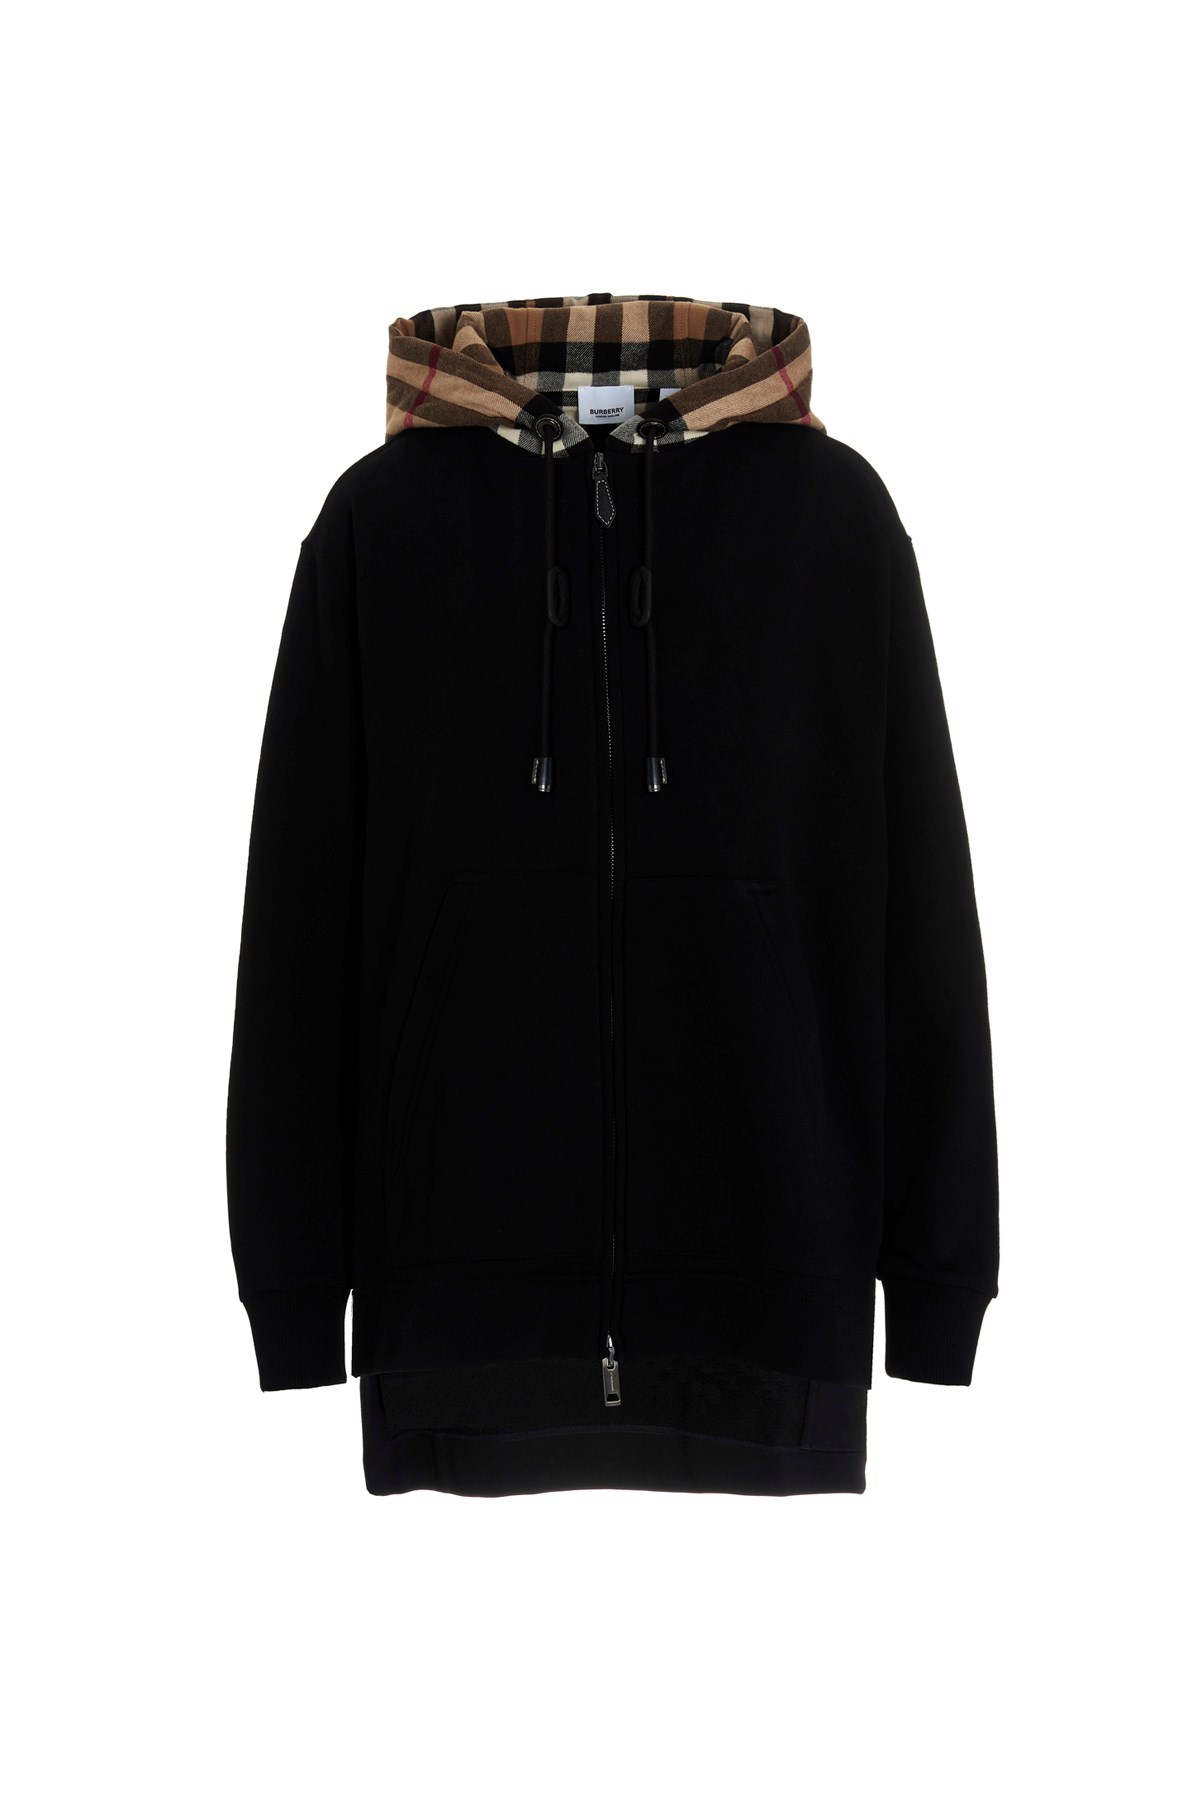 BURBERRY 'Melody’ Hoodie